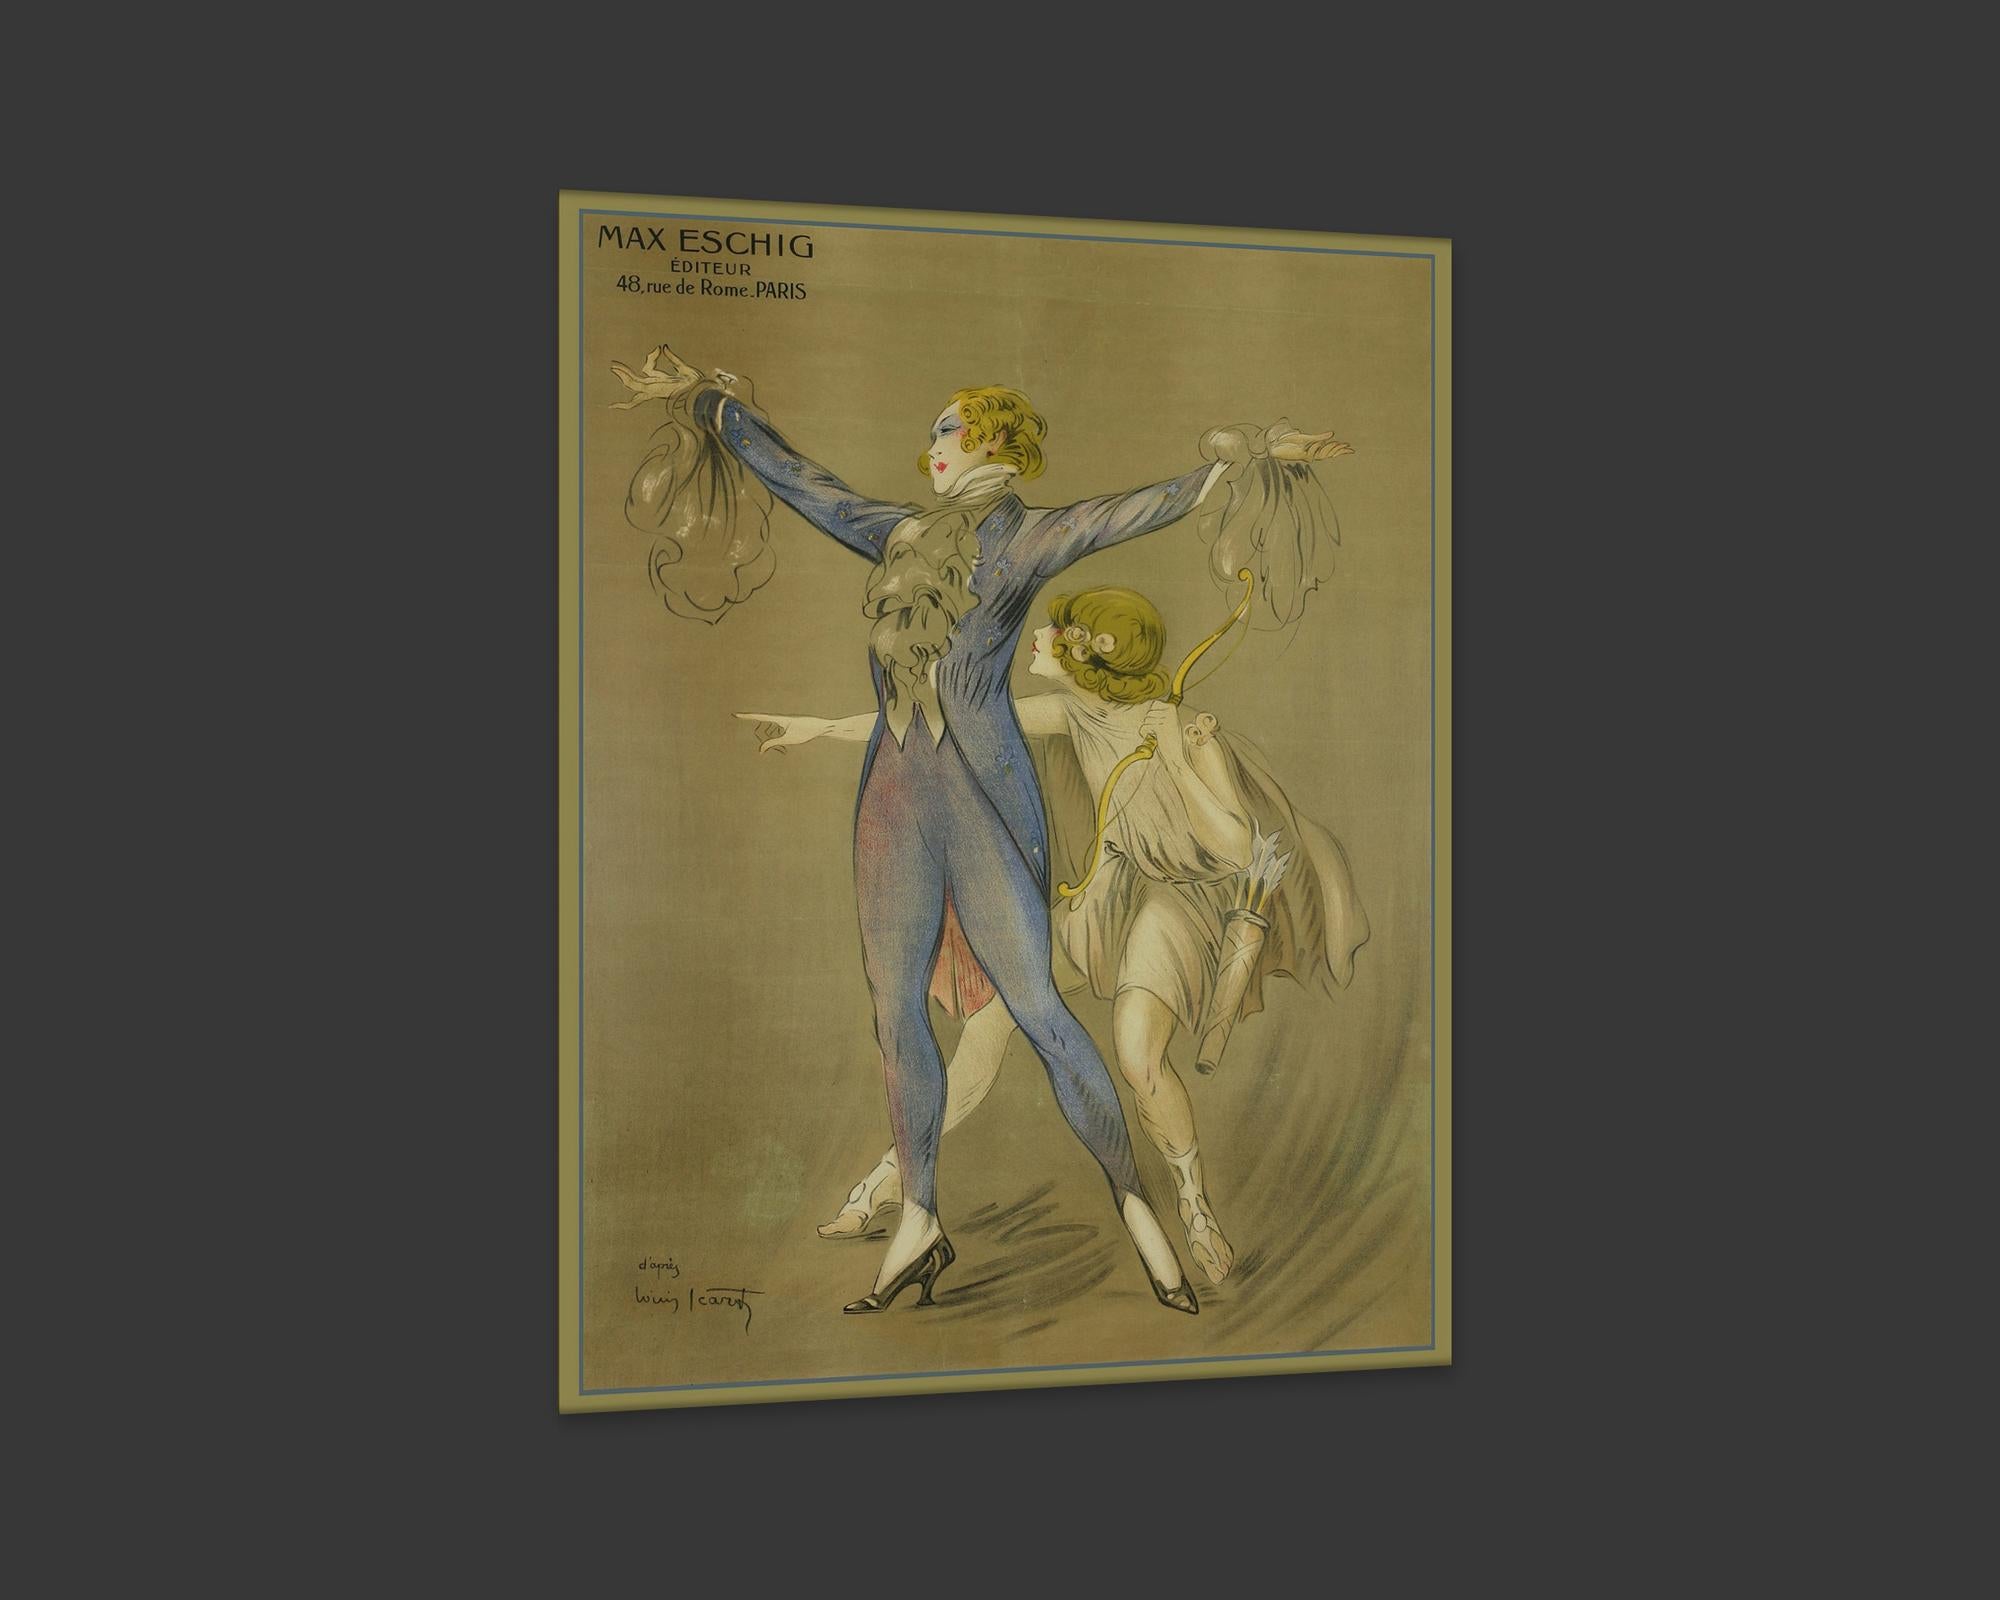 French Advert for Max Eschig, after Belle Époque Vintage Poster by Louis Icart For Sale